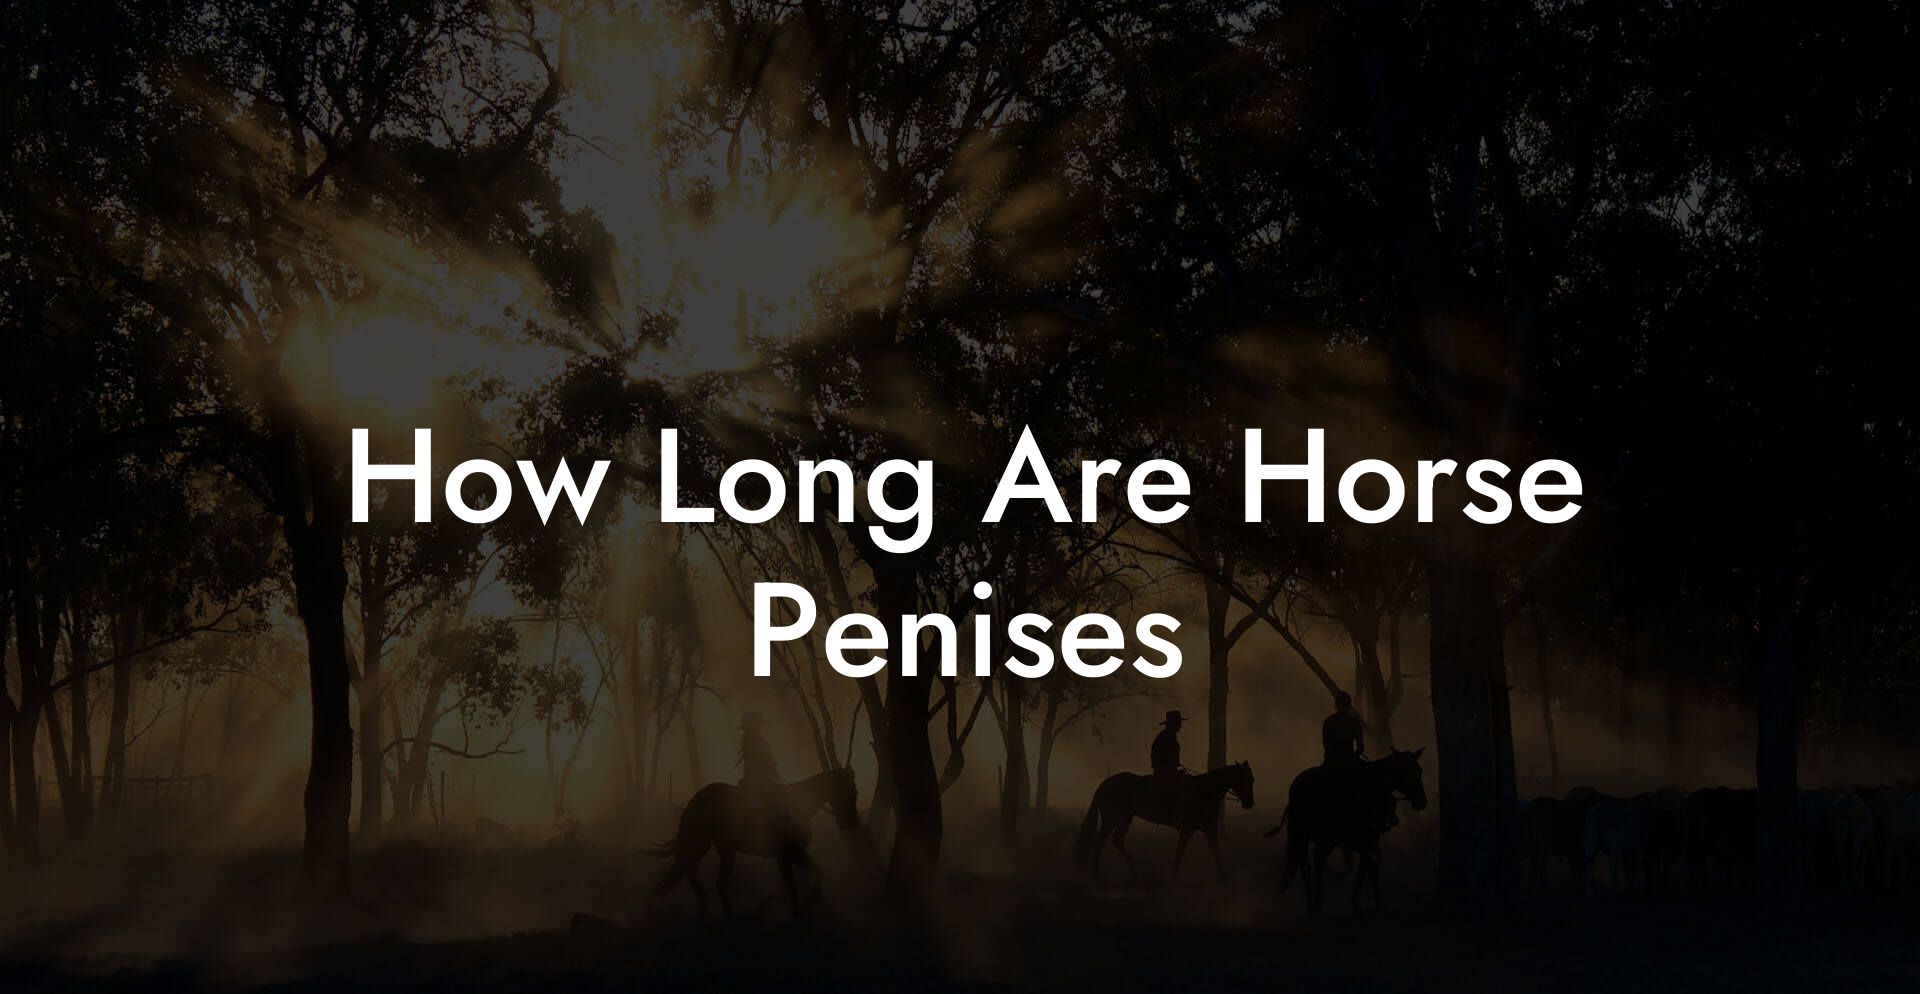 How Long Are Horse Penises